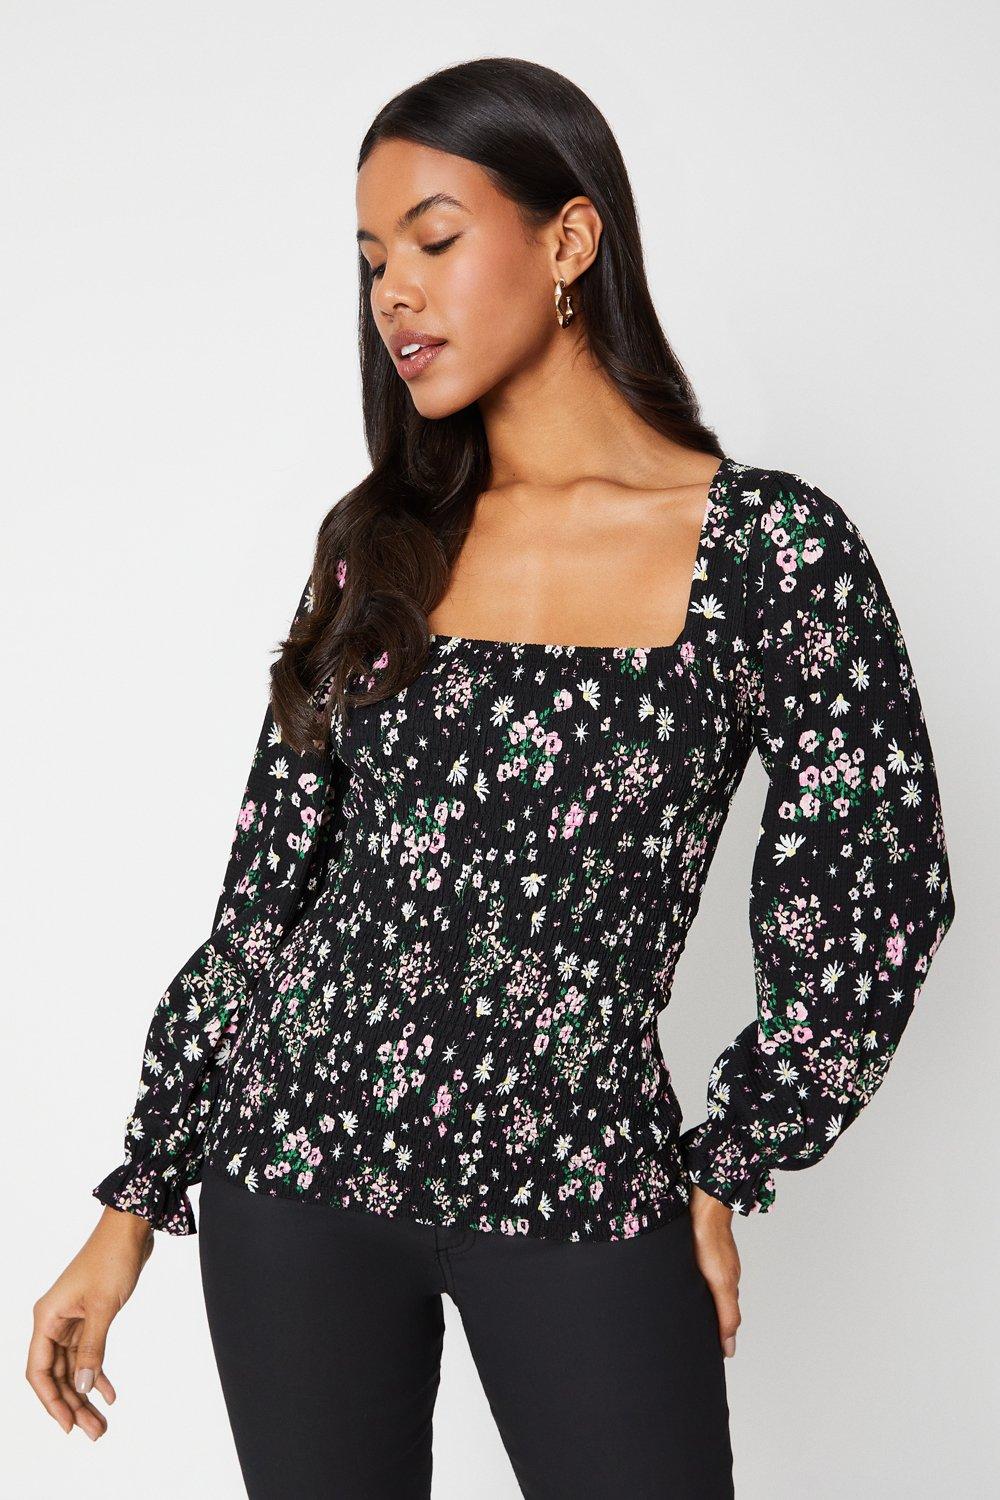 Women’s Floral Square Neck Long Sleeve Top - S